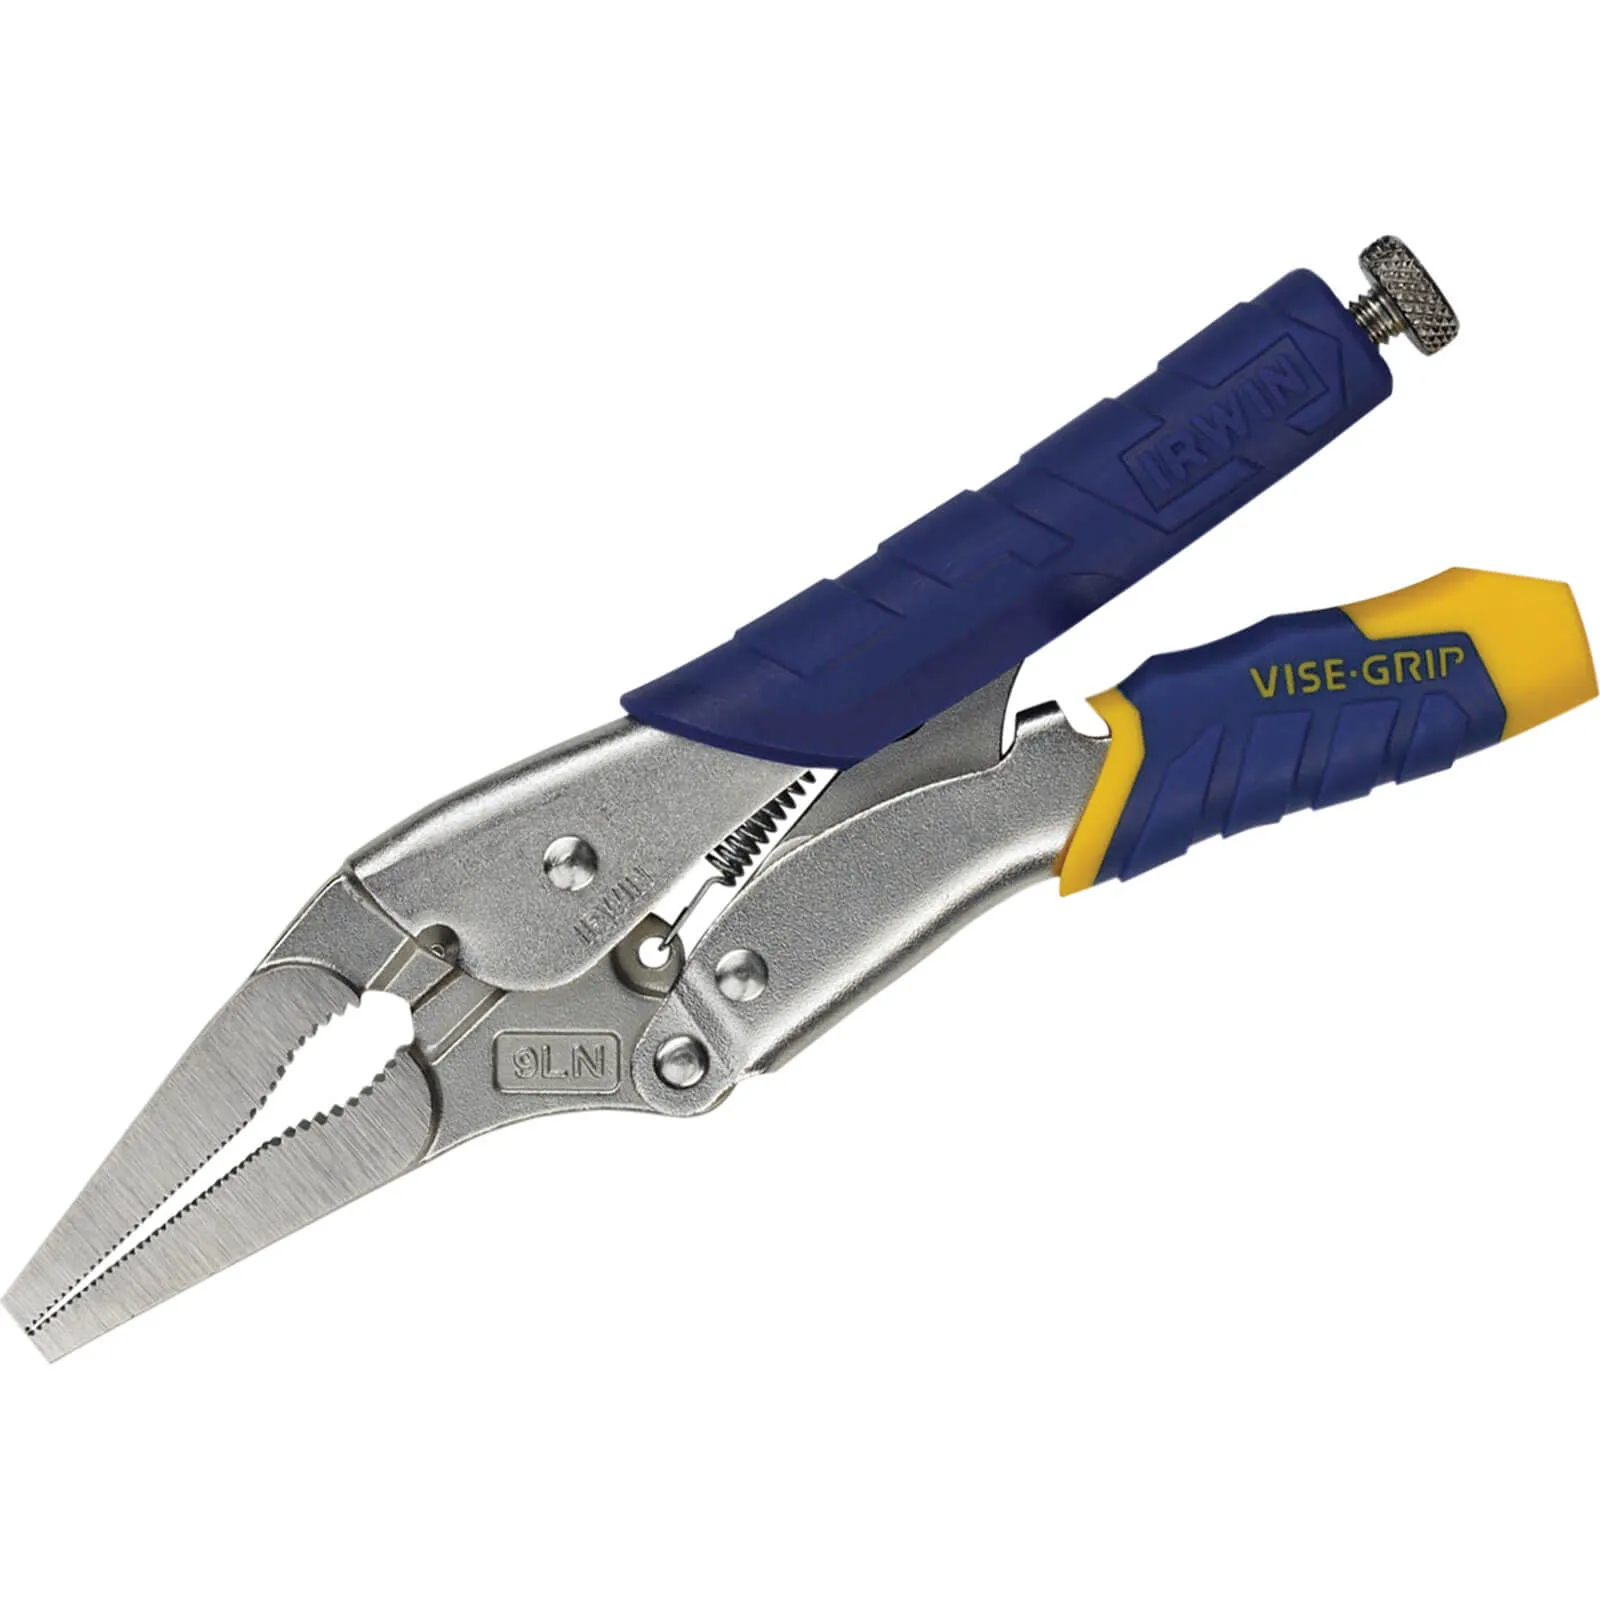 Irwin Vise Grip Long Nose Fast Release Locking Pliers - 225mm